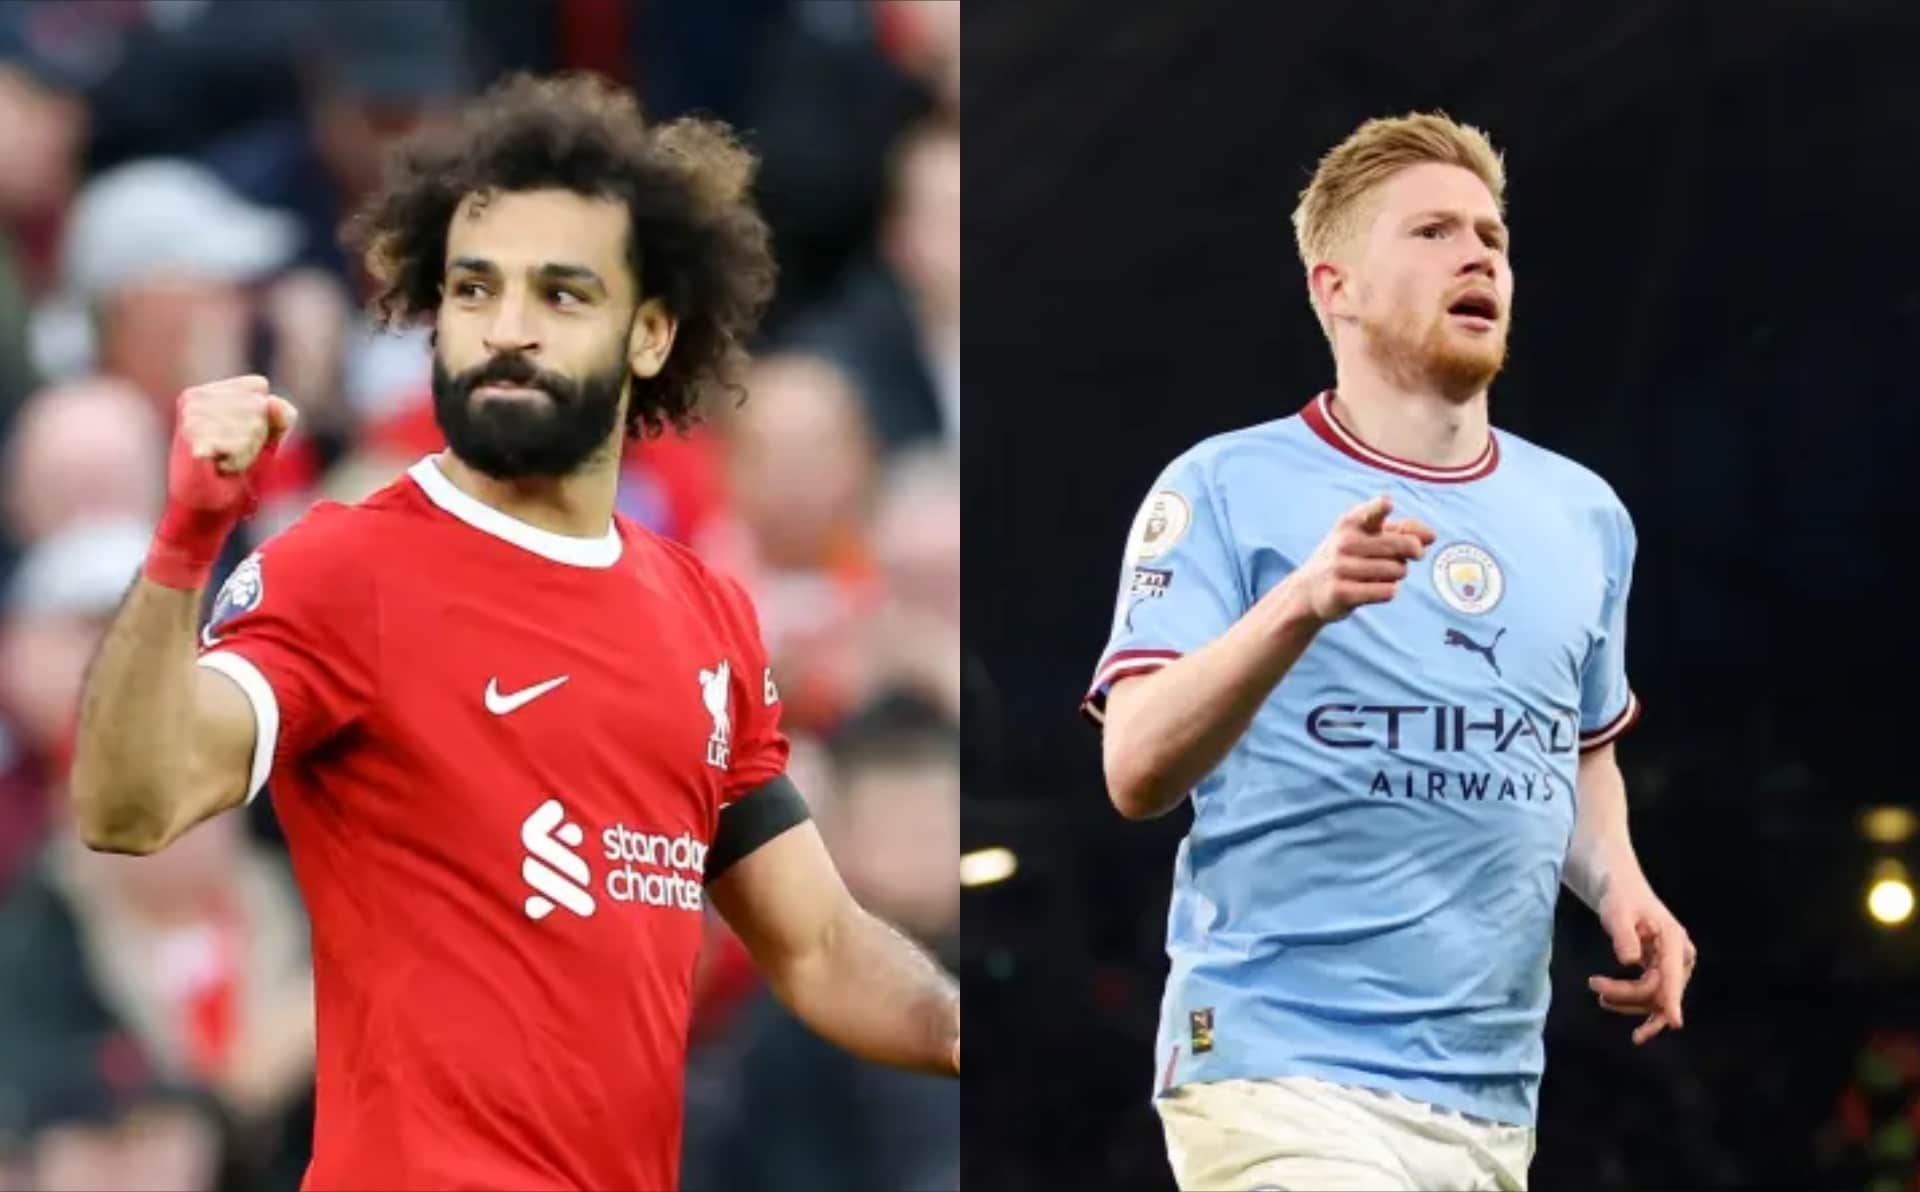 Mourinho on Salah, De Bruyne exits from Chelsea - "They were kids who couldn't wait"